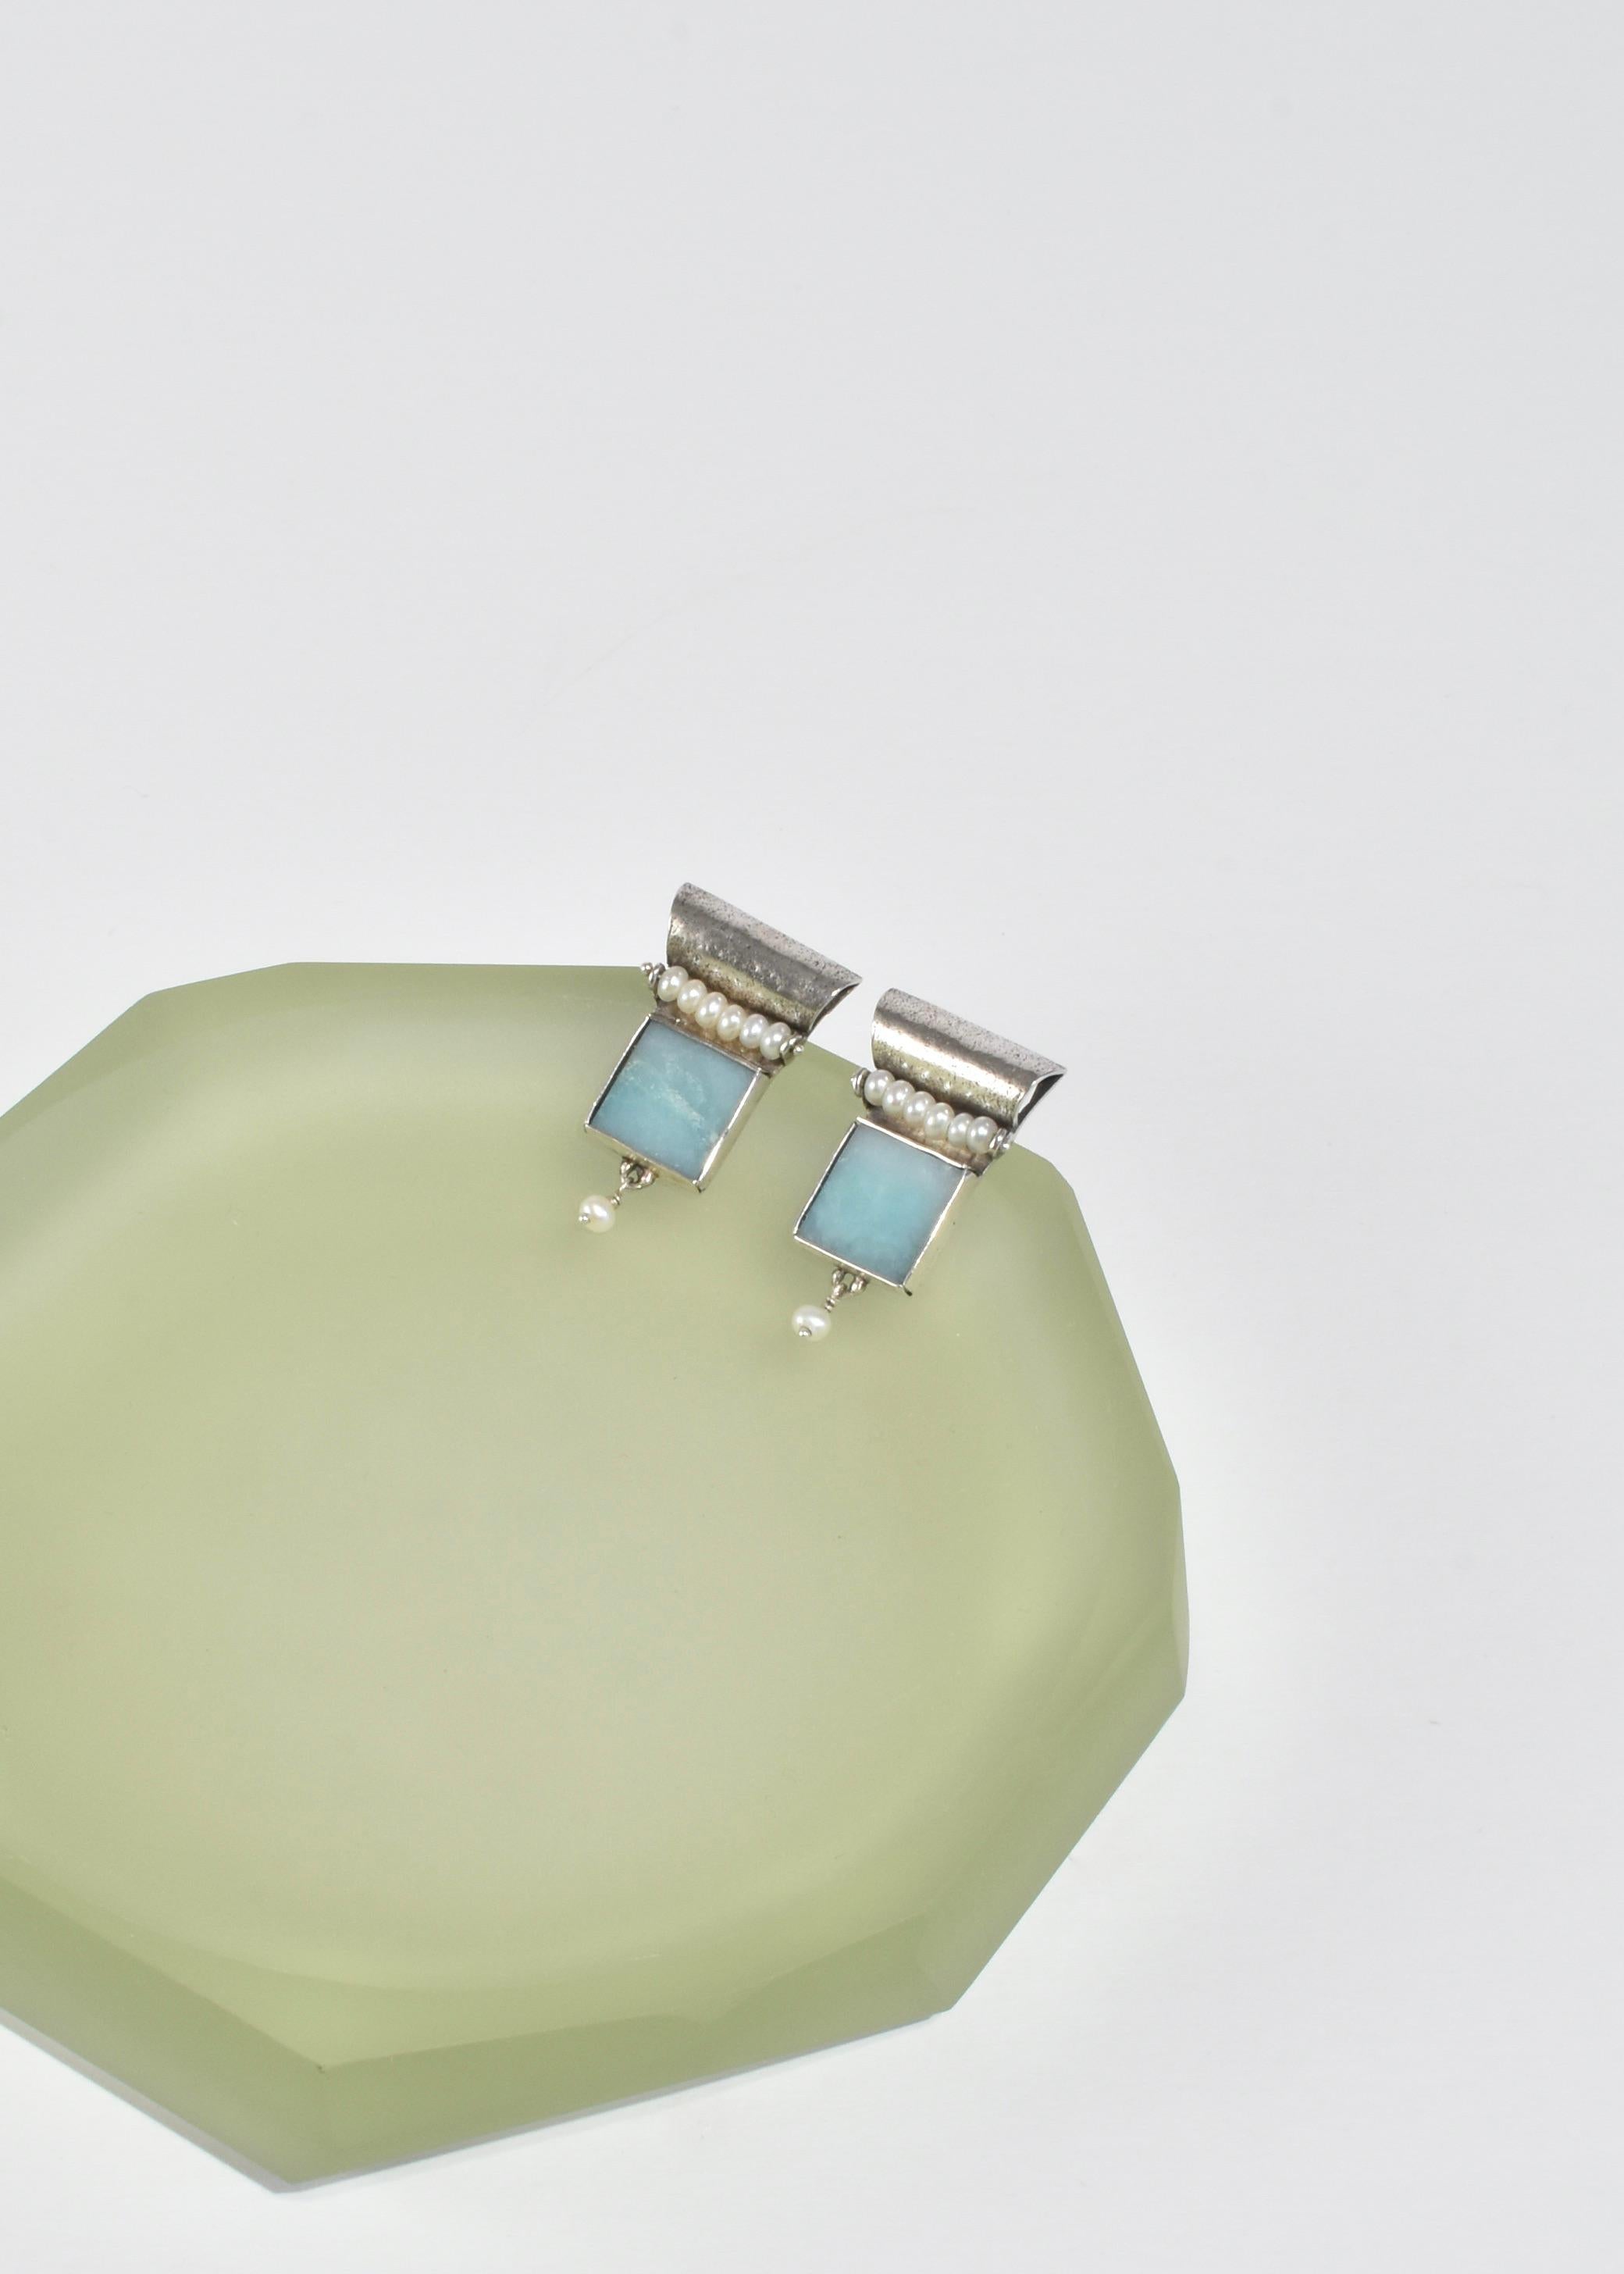 Vintage handmade silver earrings with square larimar stones and freshwater pearl detail, pierced.

Material: Sterling silver, larimar, pearl.

